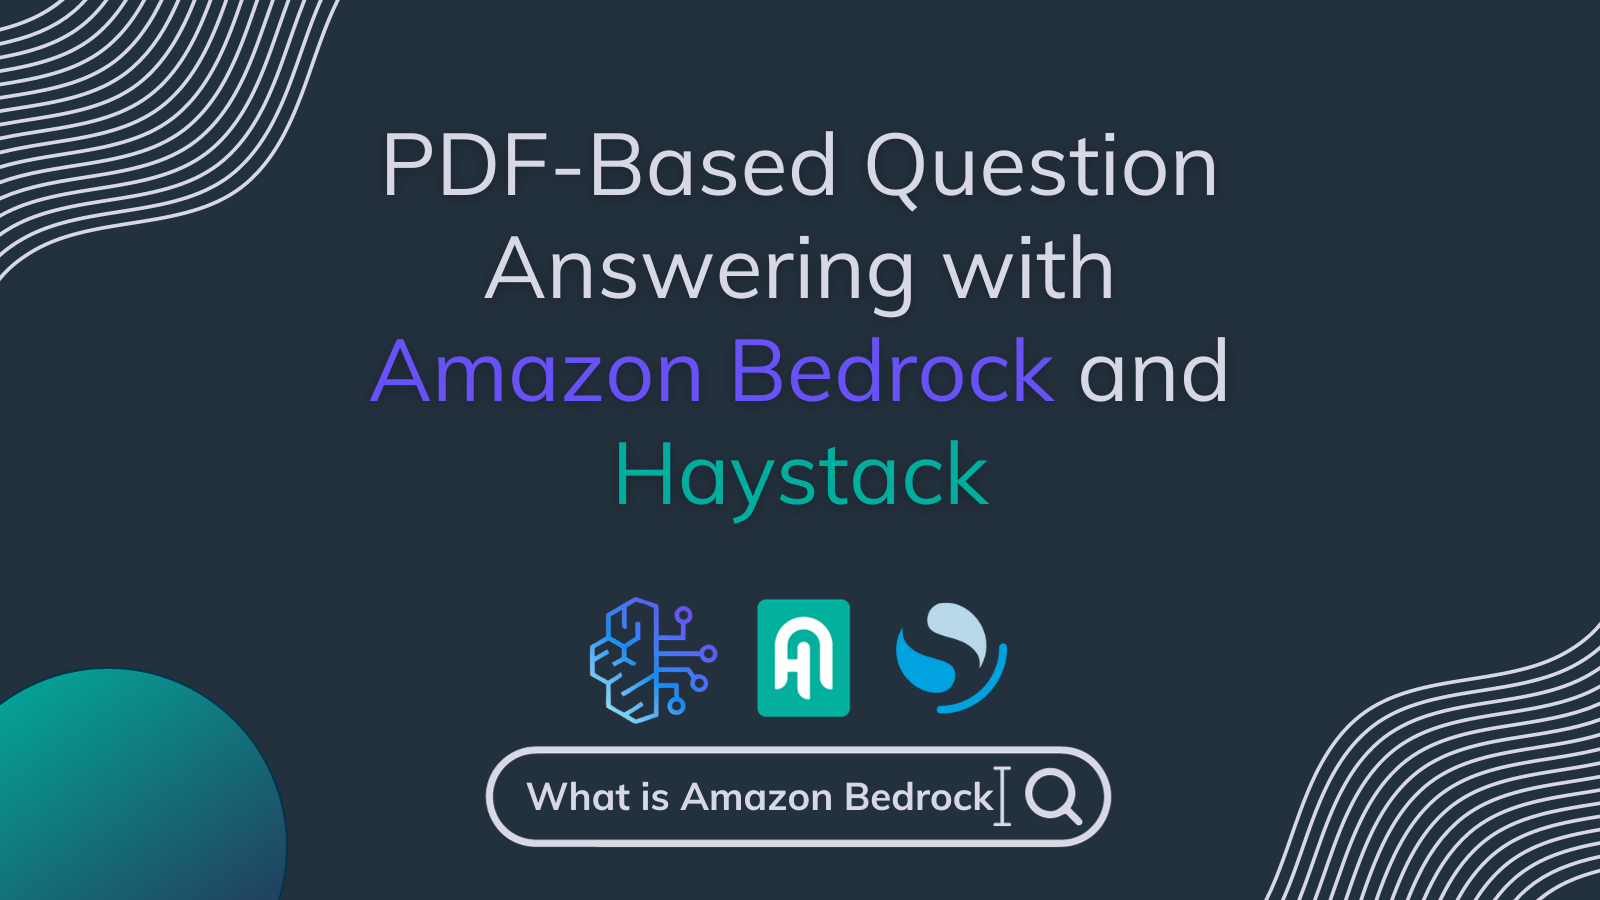 PDF-Based Question Answering with Amazon Bedrock and Haystack